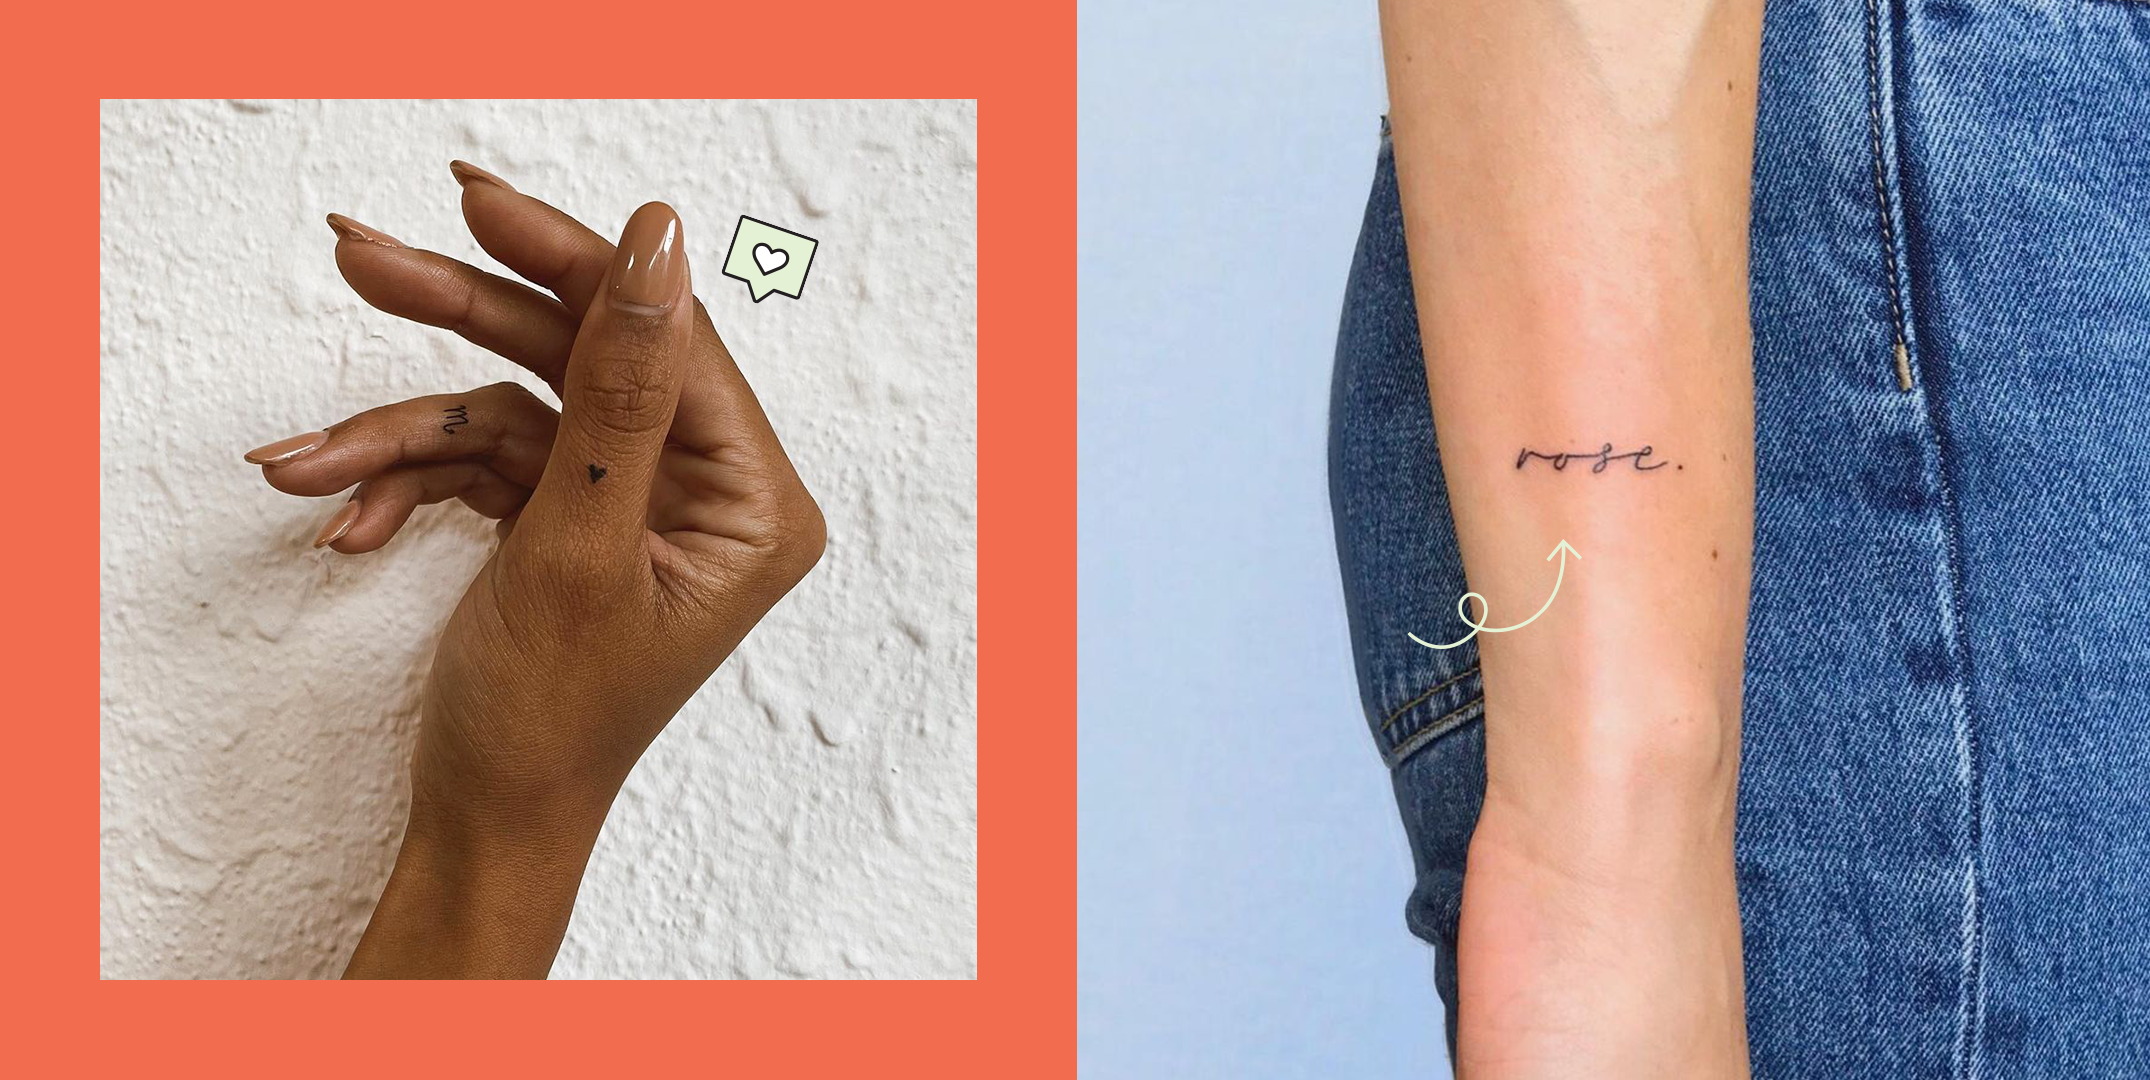 Cute small tattoos to get